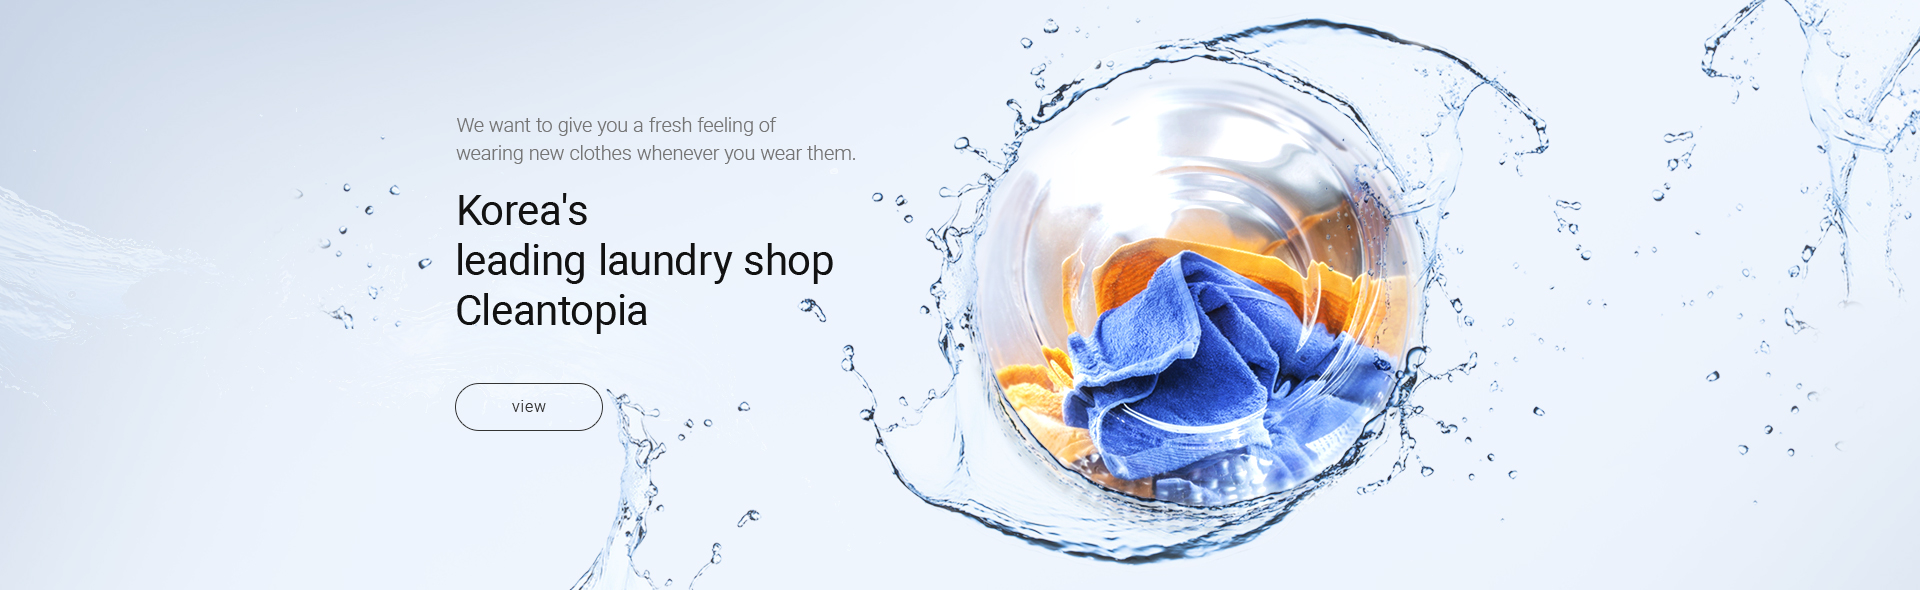 We want to give you a fresh feeling of wearing new clothes whenever you wear them. Korea's leading laundry shop Cleantopia